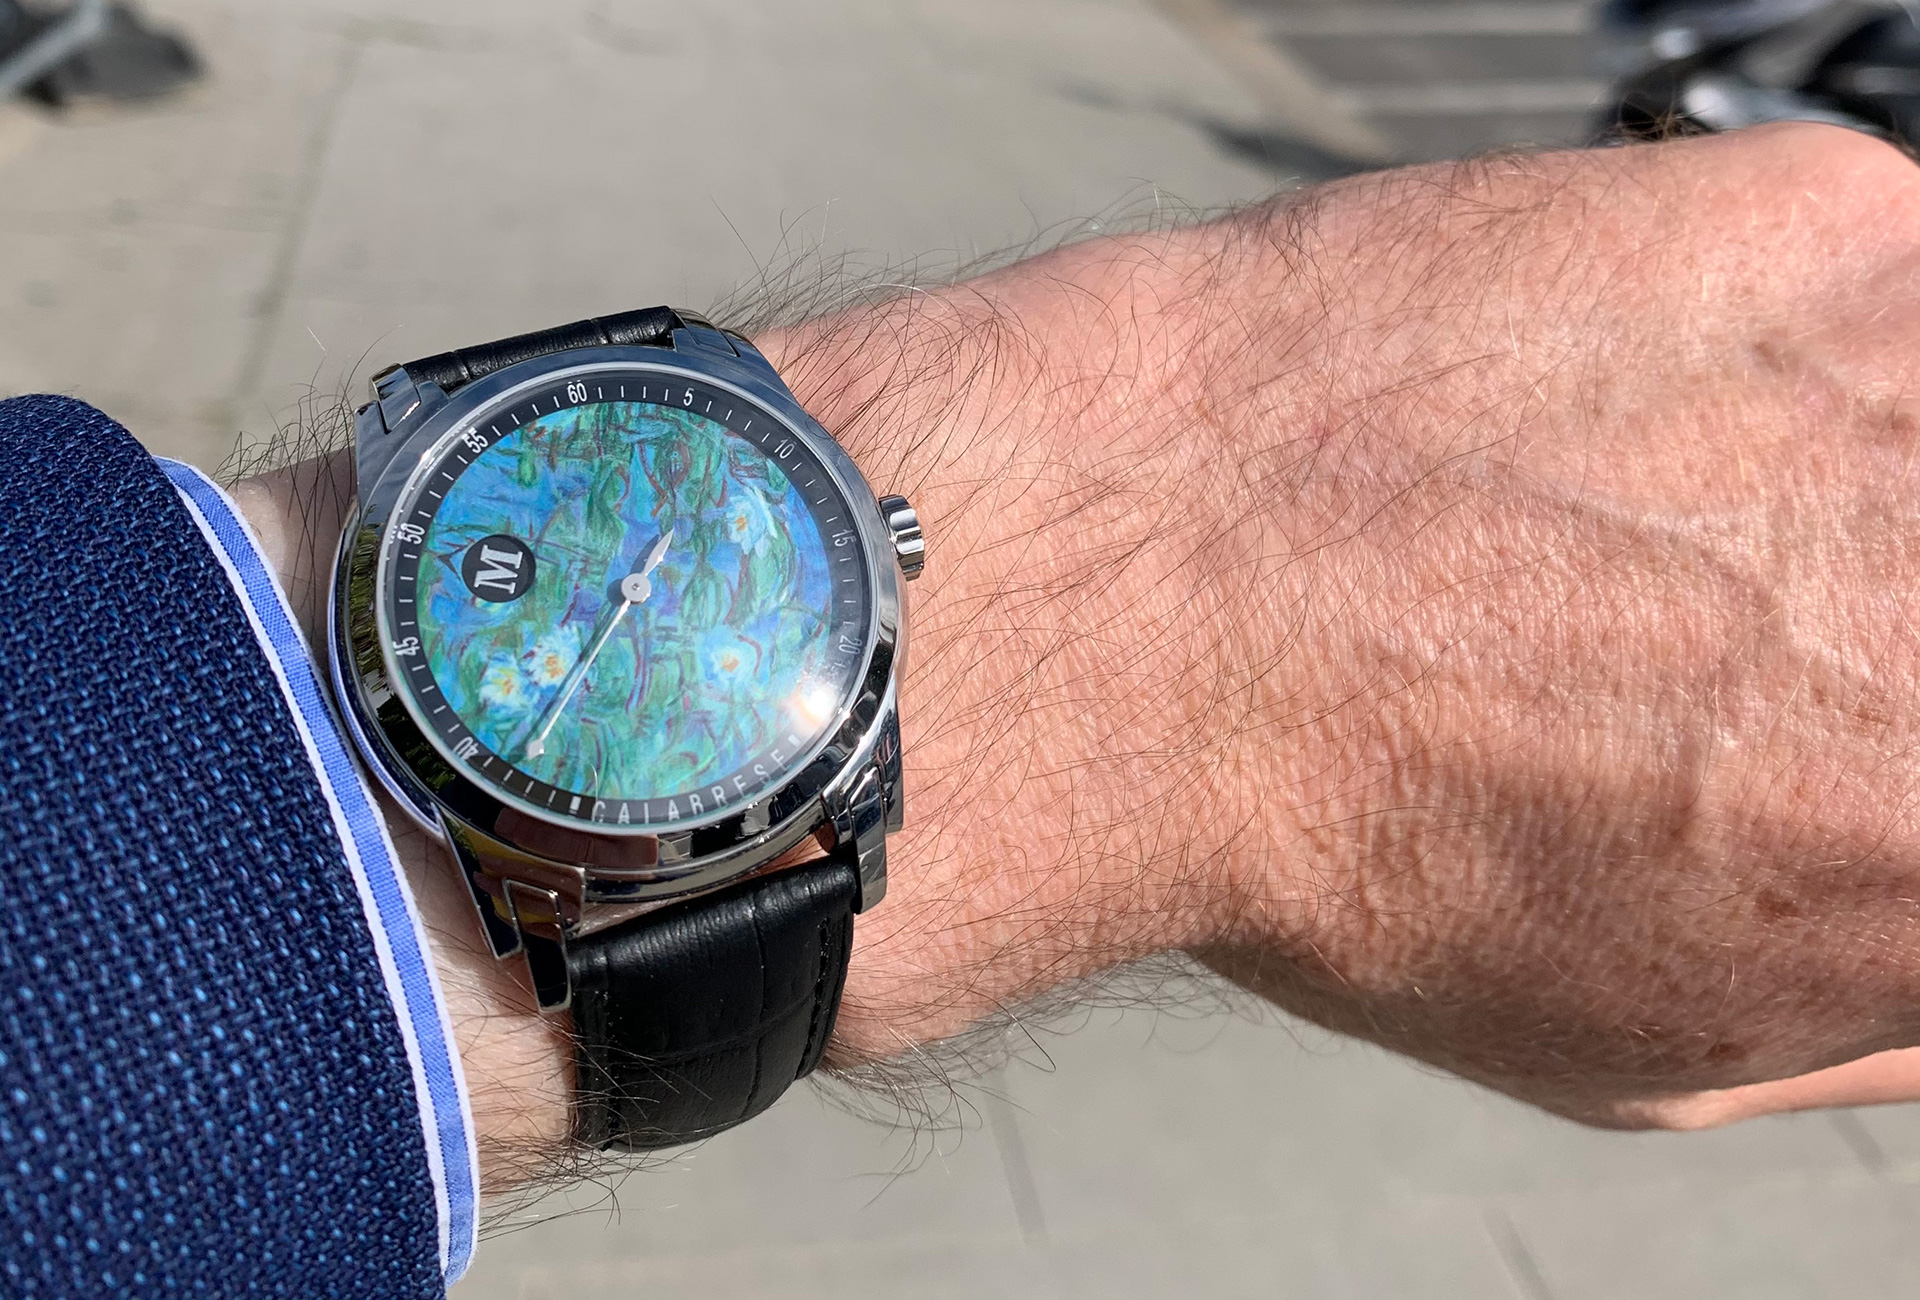 A Monet for the wrist